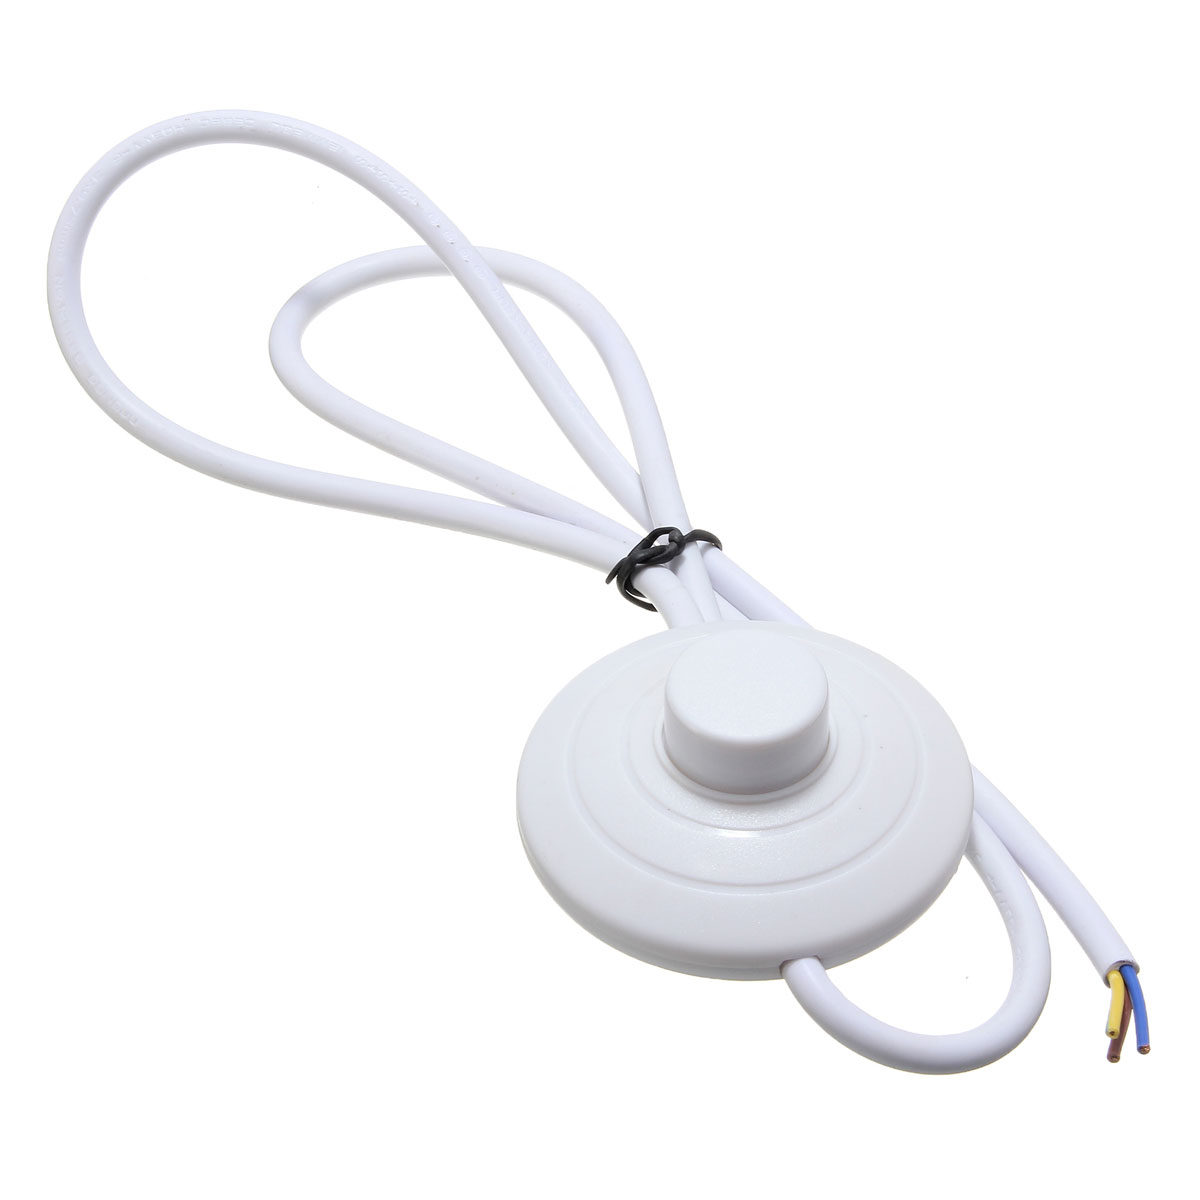 1M-Circular-Lighting-Button-Switch-with-3-Core-Inline-Flex-Cord-for-Table-Desk-Lamp-1271121-4